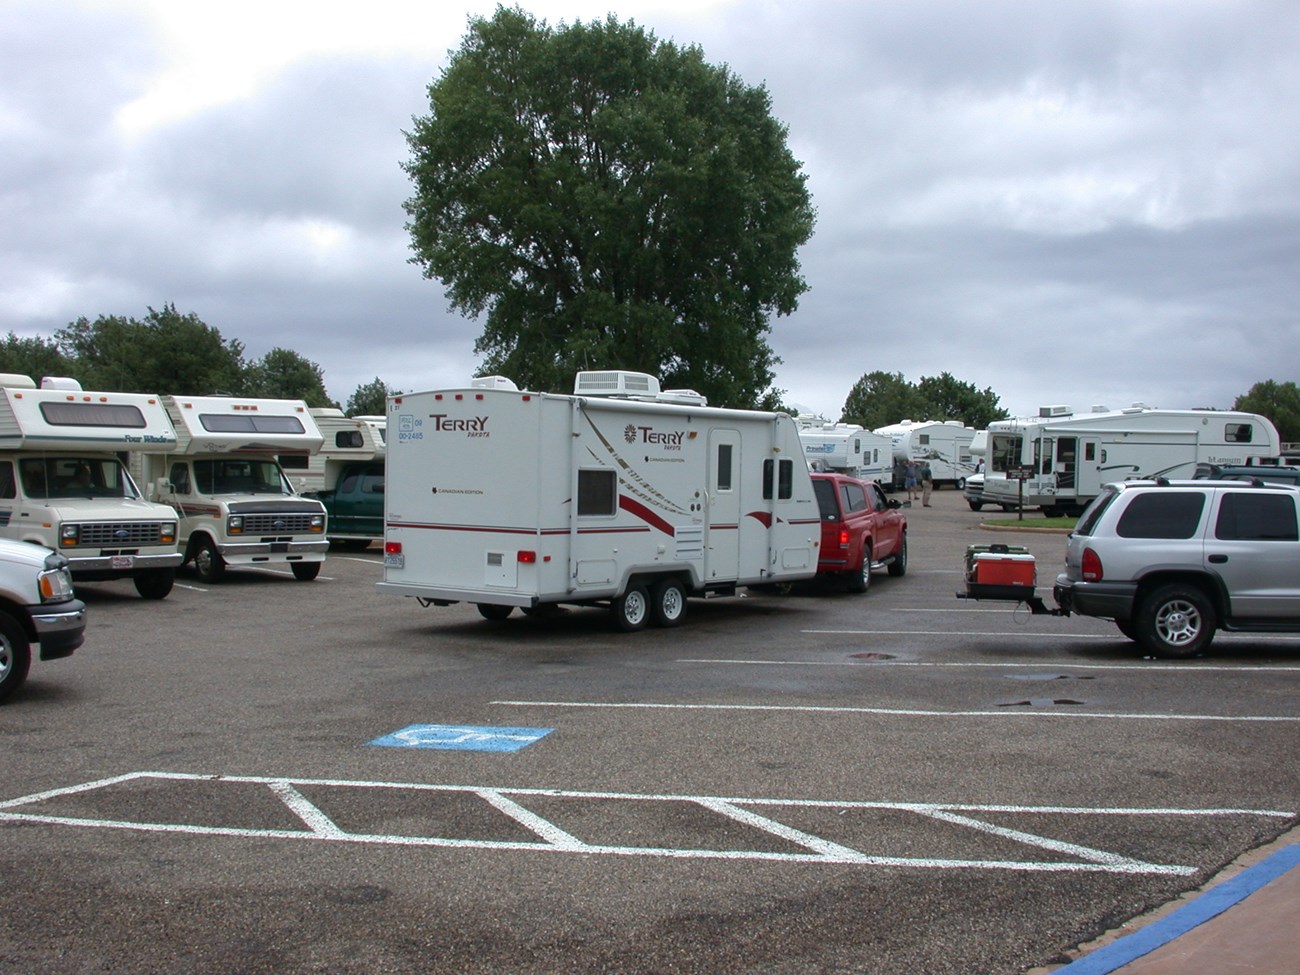 22 french canadian rvs